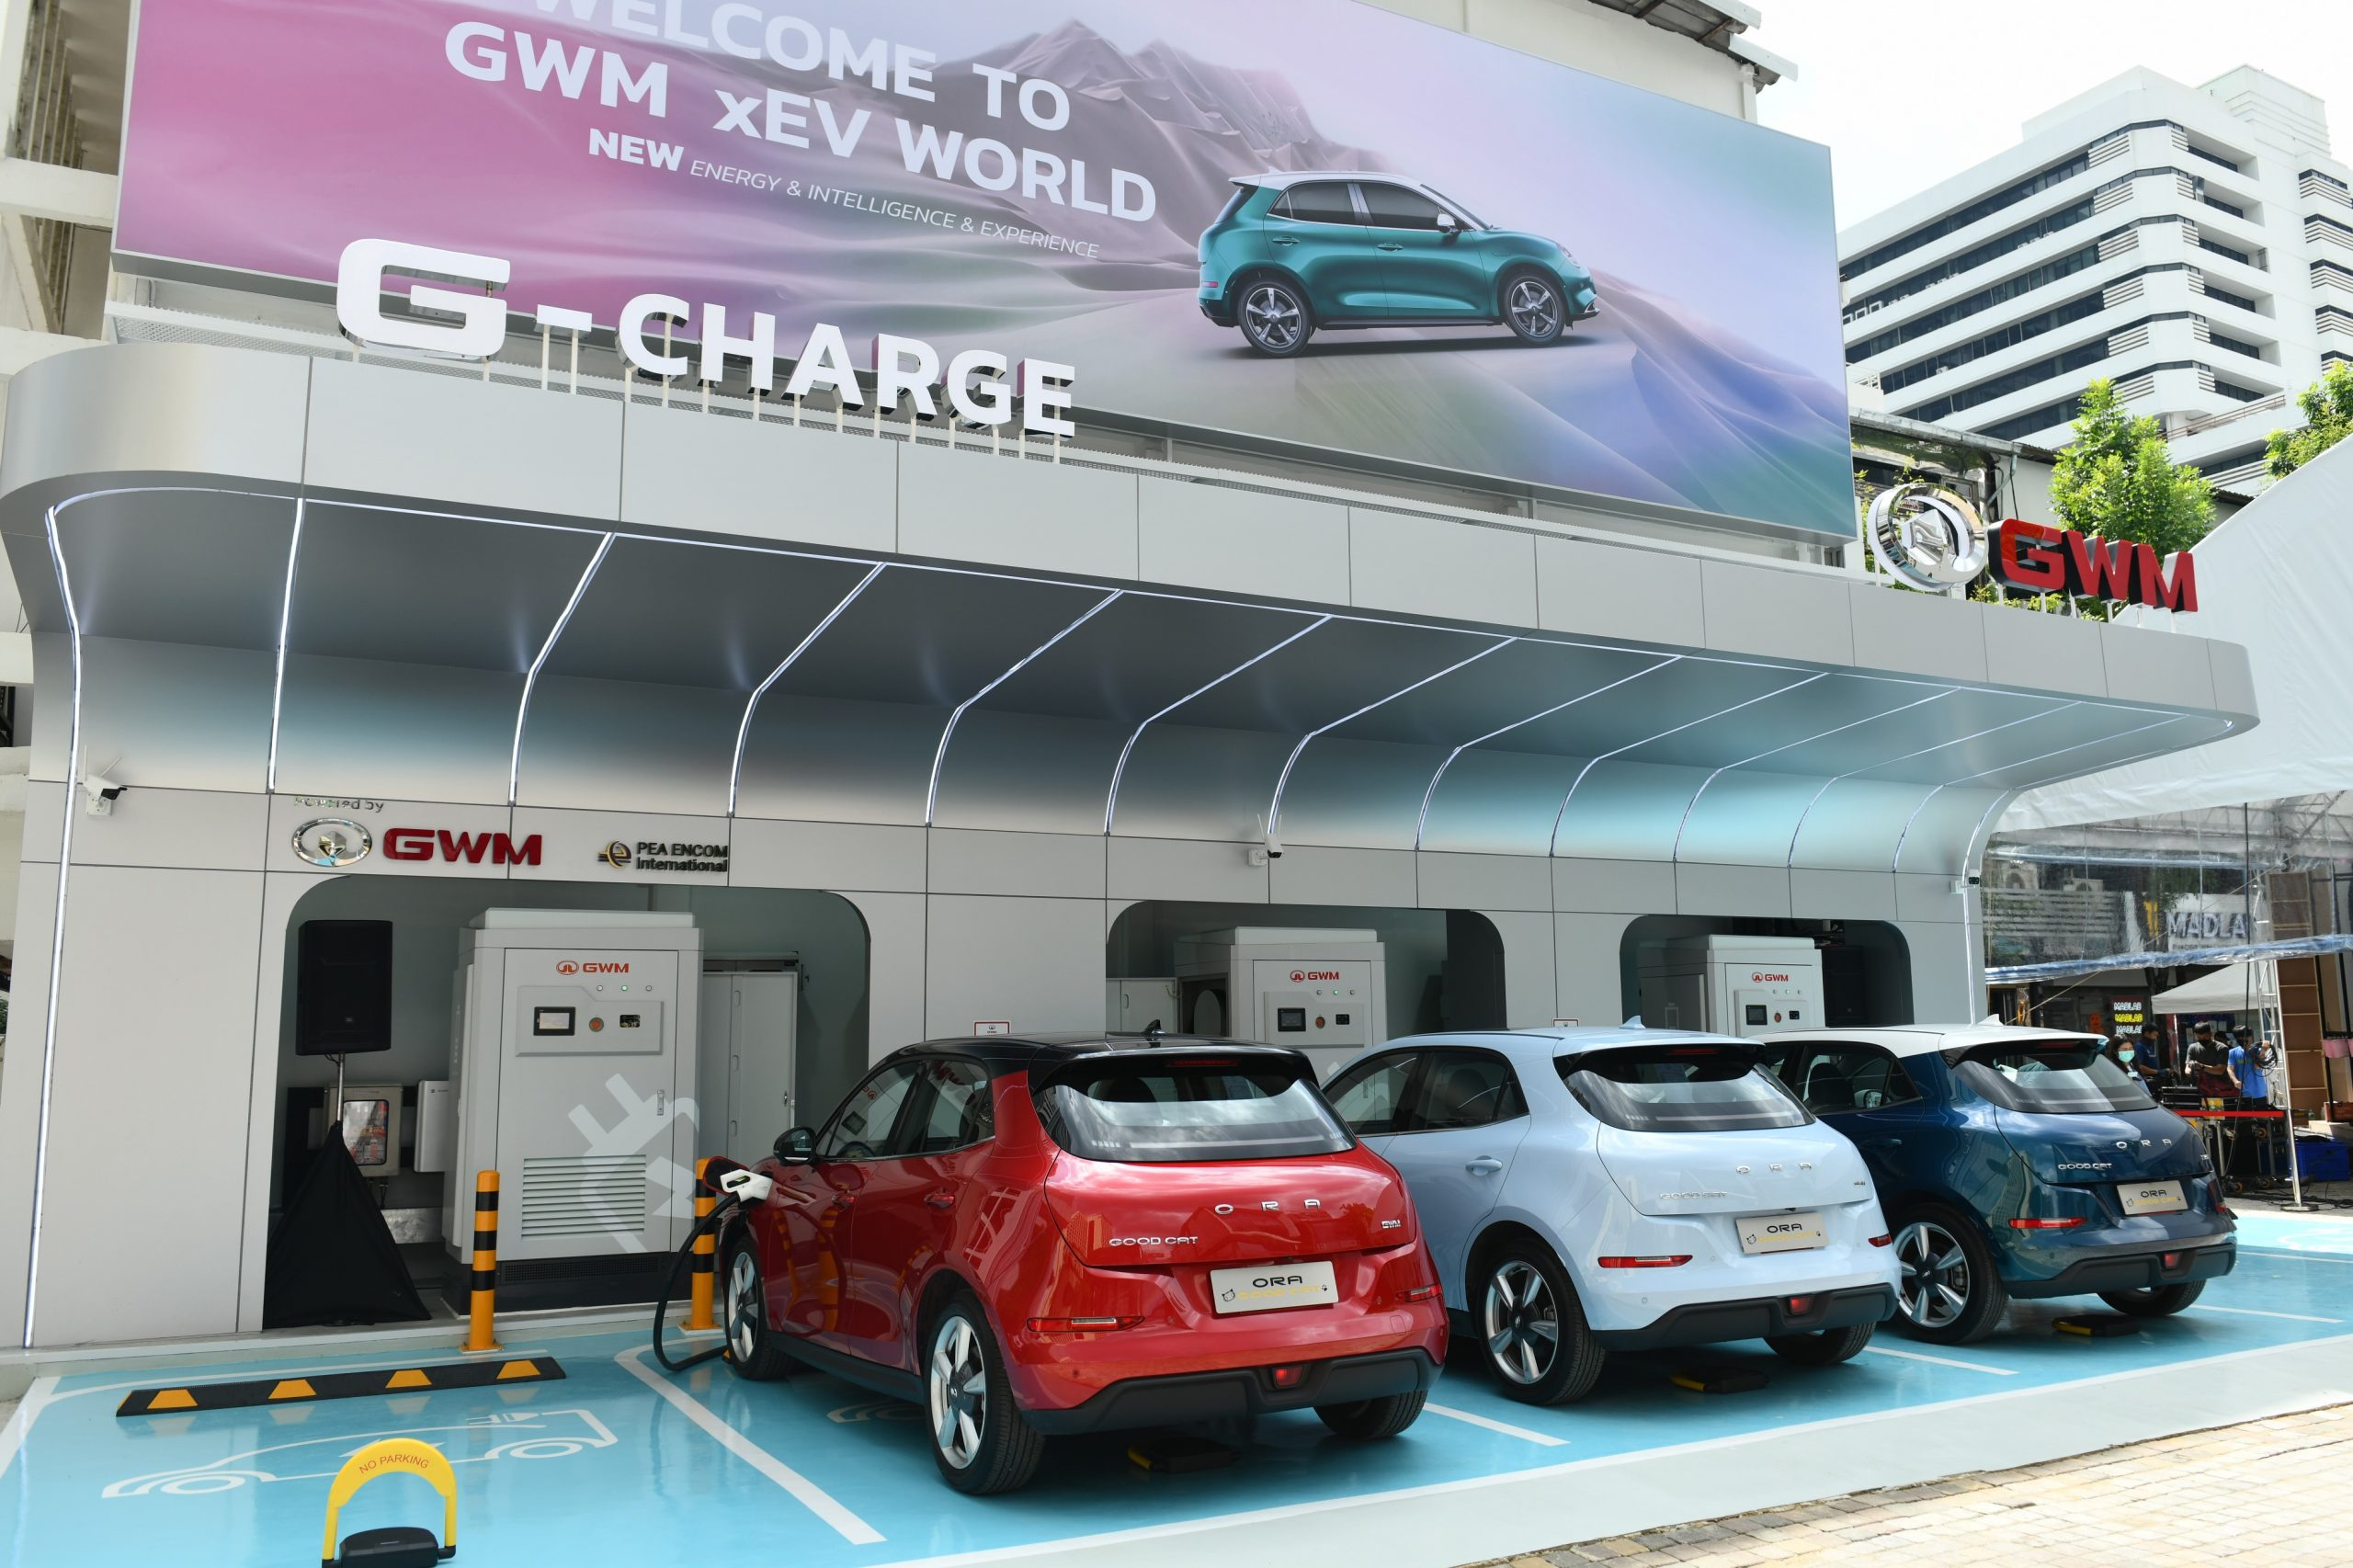 G-Charge Supercharging Station (2)